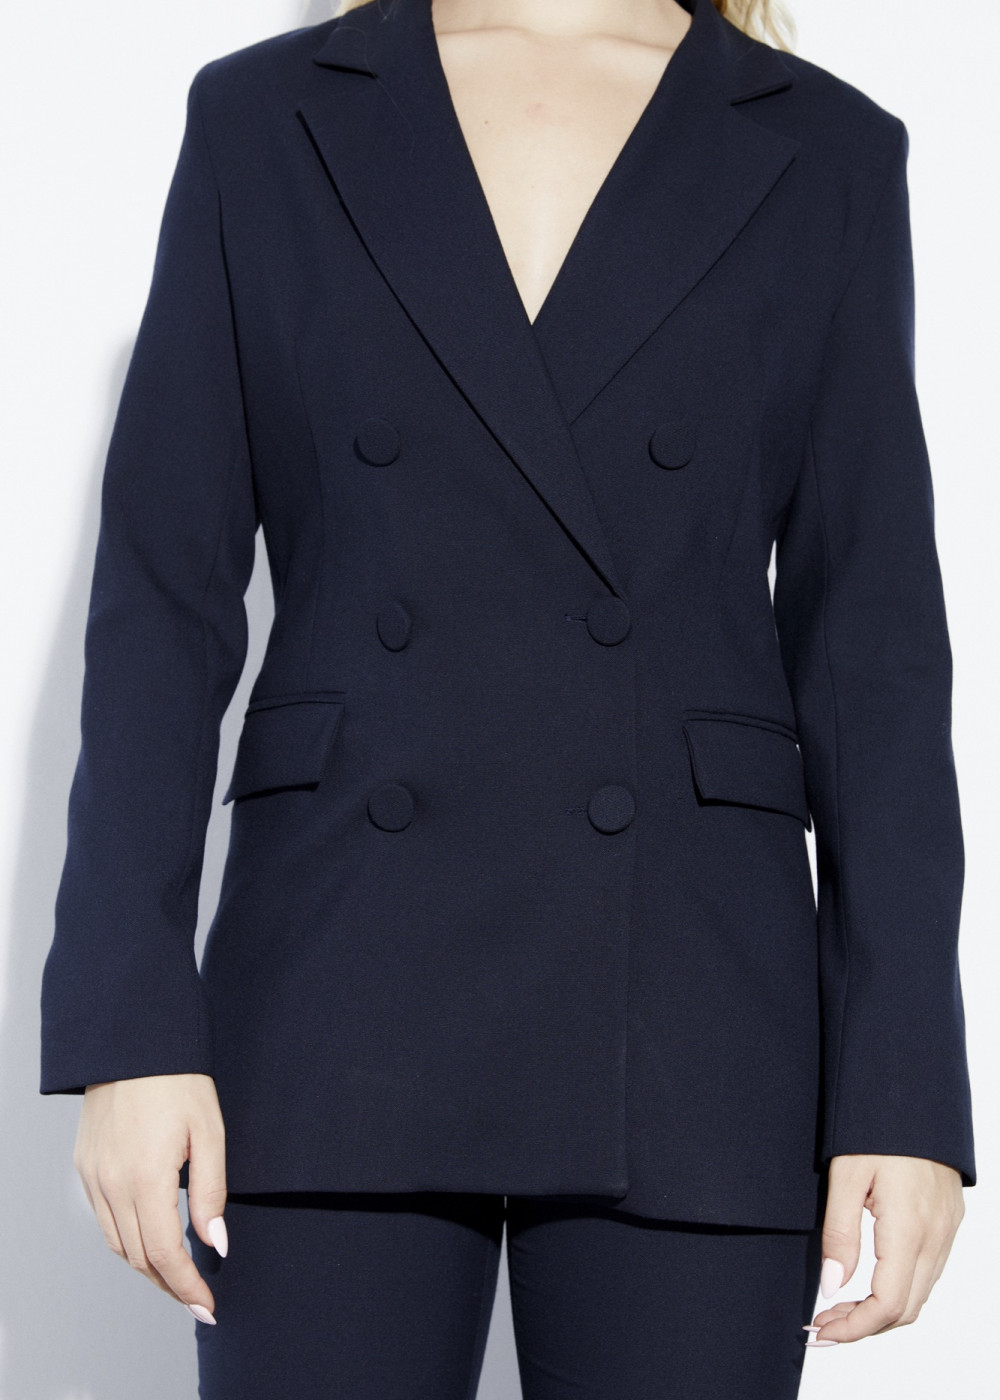 Blazer Jacket With Flat Buttons - Flaremsleeve Trousers